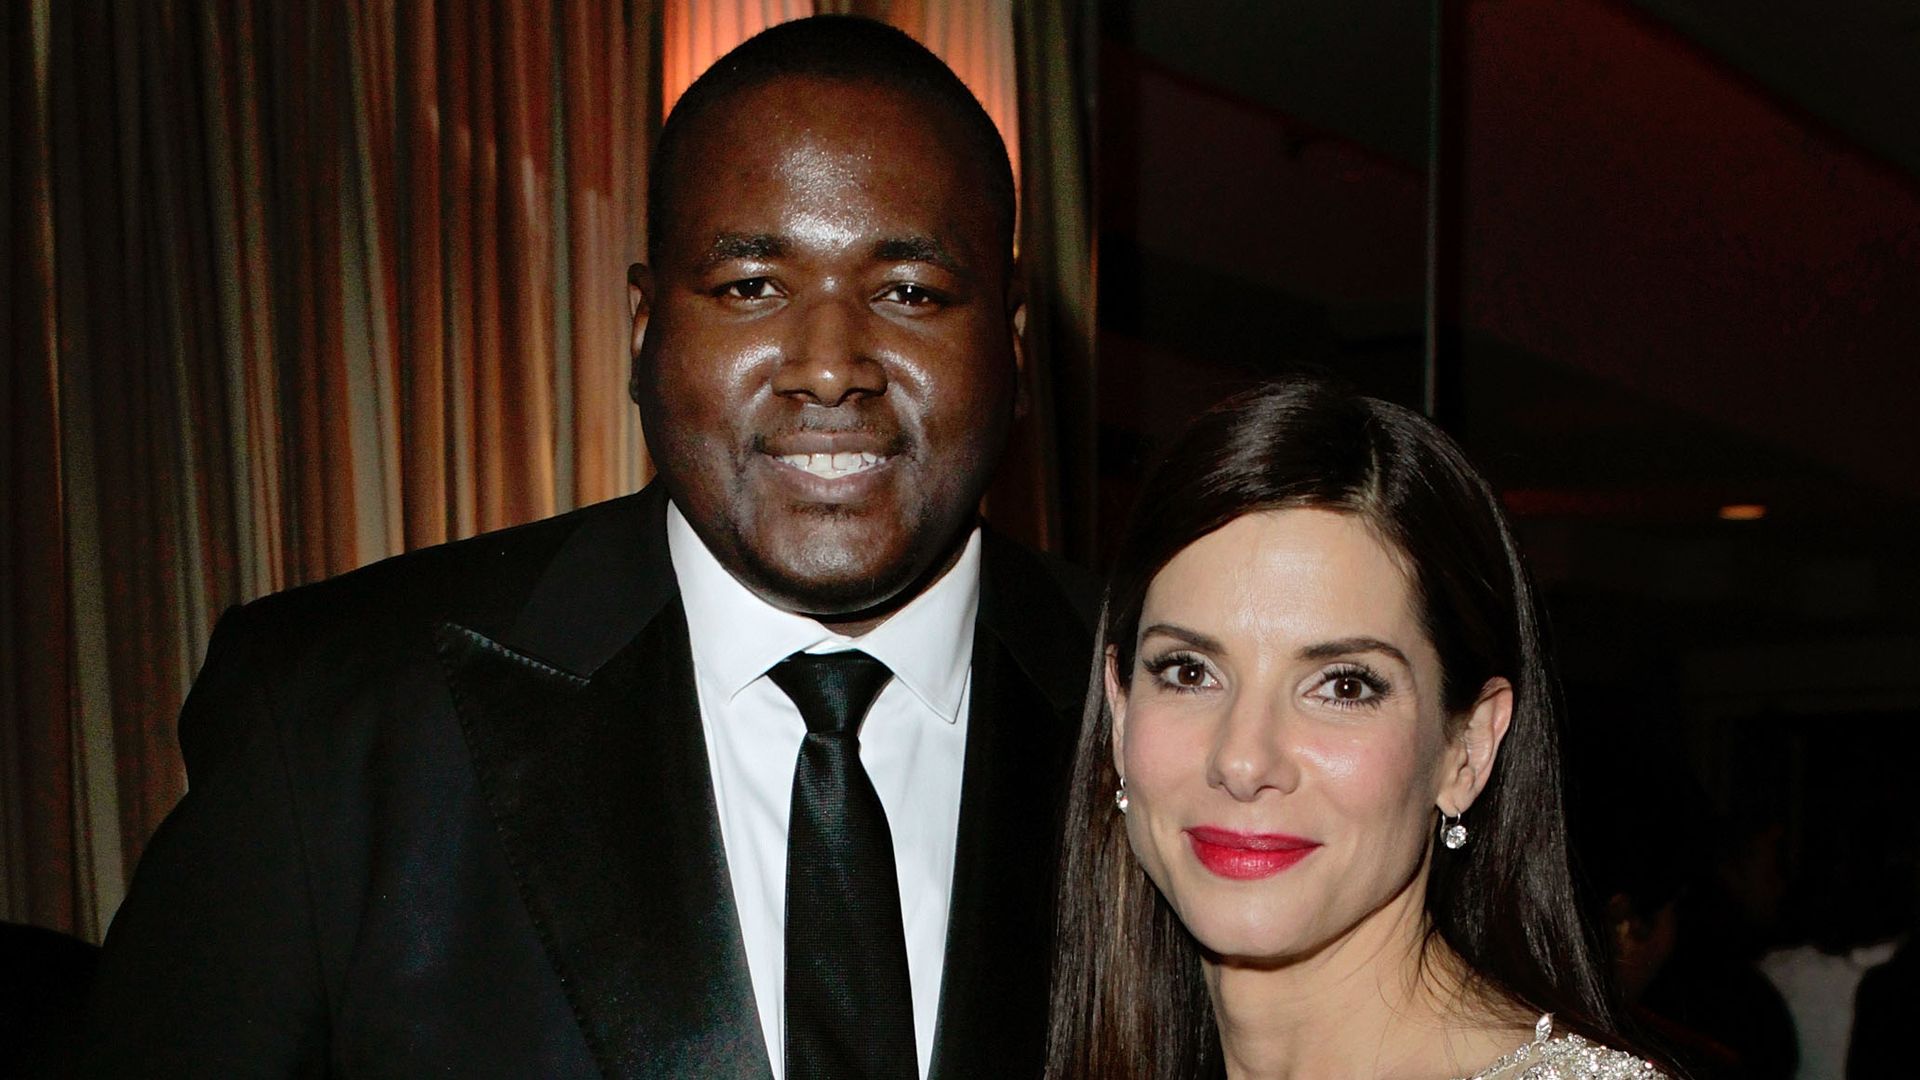 Quinton Aaron and Sandra Bullock attend the 2010 Vanity Fair Oscar Party at the Sunset Tower Hotel on March 7, 2010 in West Hollywood, California